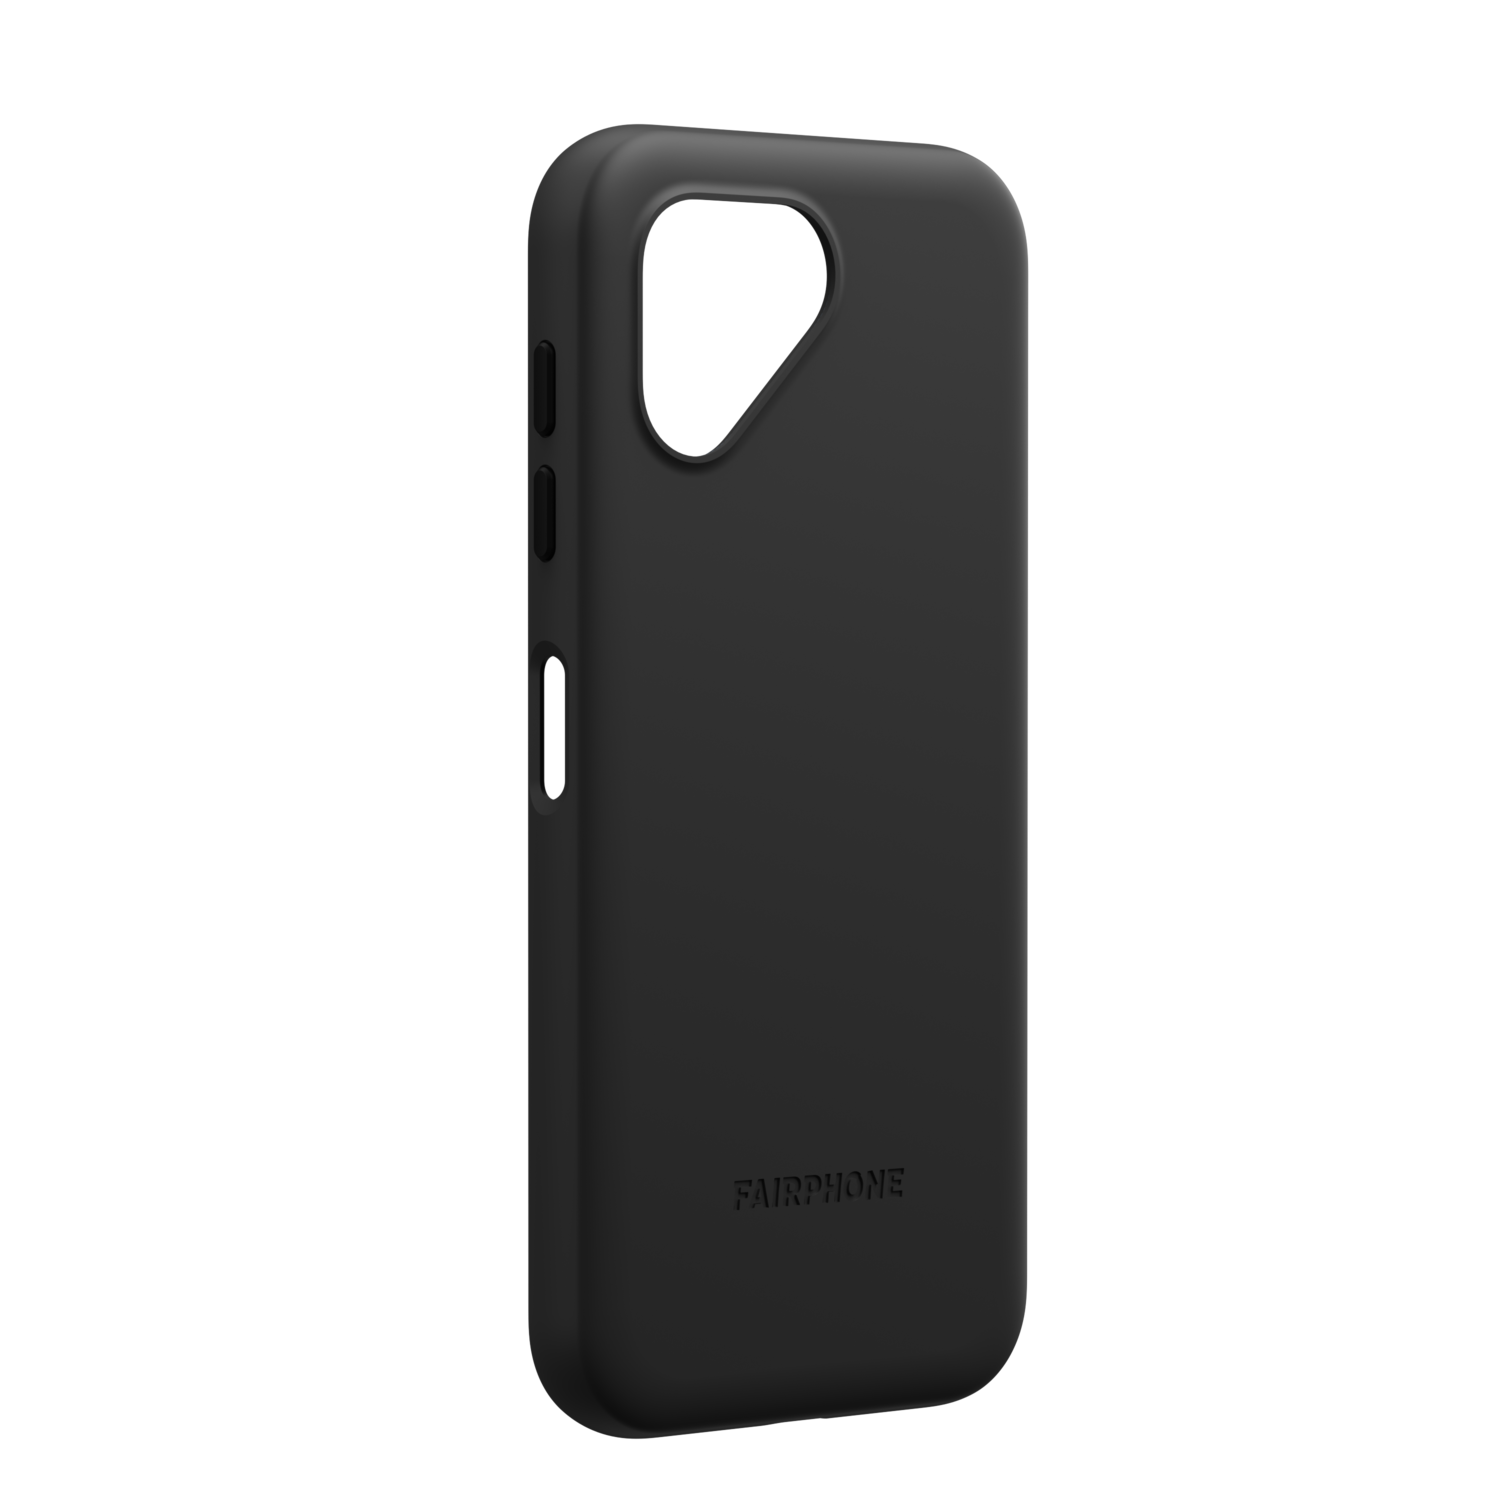 Photos - Other for Computer Fairphone 5 Matte Black Protective Case F5CASE-1ZW-WW1 